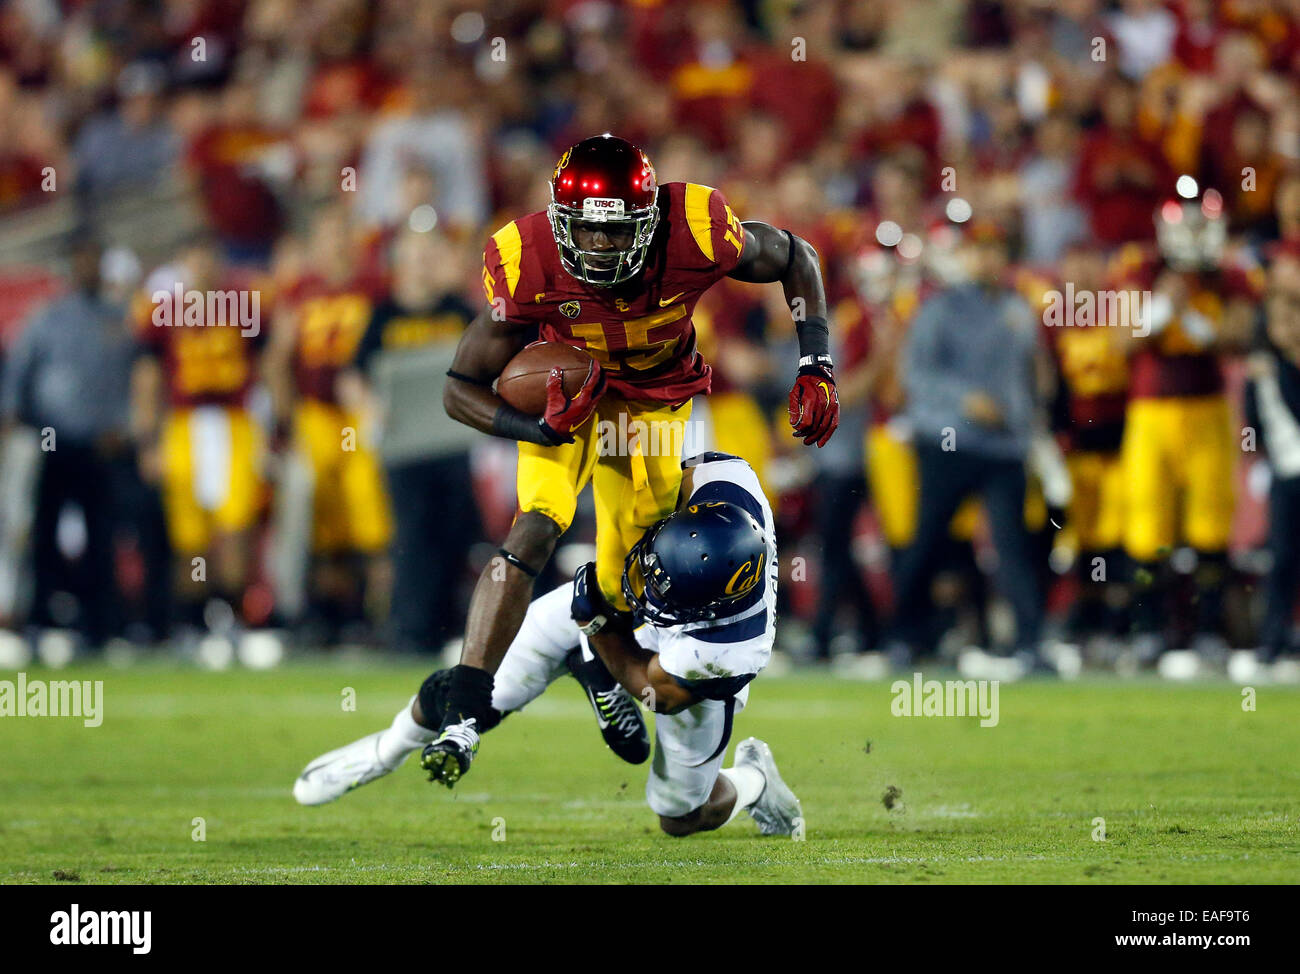 Los Angeles, CAlifornia, USA. 13th Nov, 2014. USC Trojans wide receiver Nelson Agholor #15 makes a catch and is tackled by California Golden Bears safety Stefan McClure #21 during the NCAA Football game between the California Golden Bears and the USC Trojans at the Coliseum in Los Angeles, California. Credit:  Cal Sport Media/Alamy Live News Stock Photo